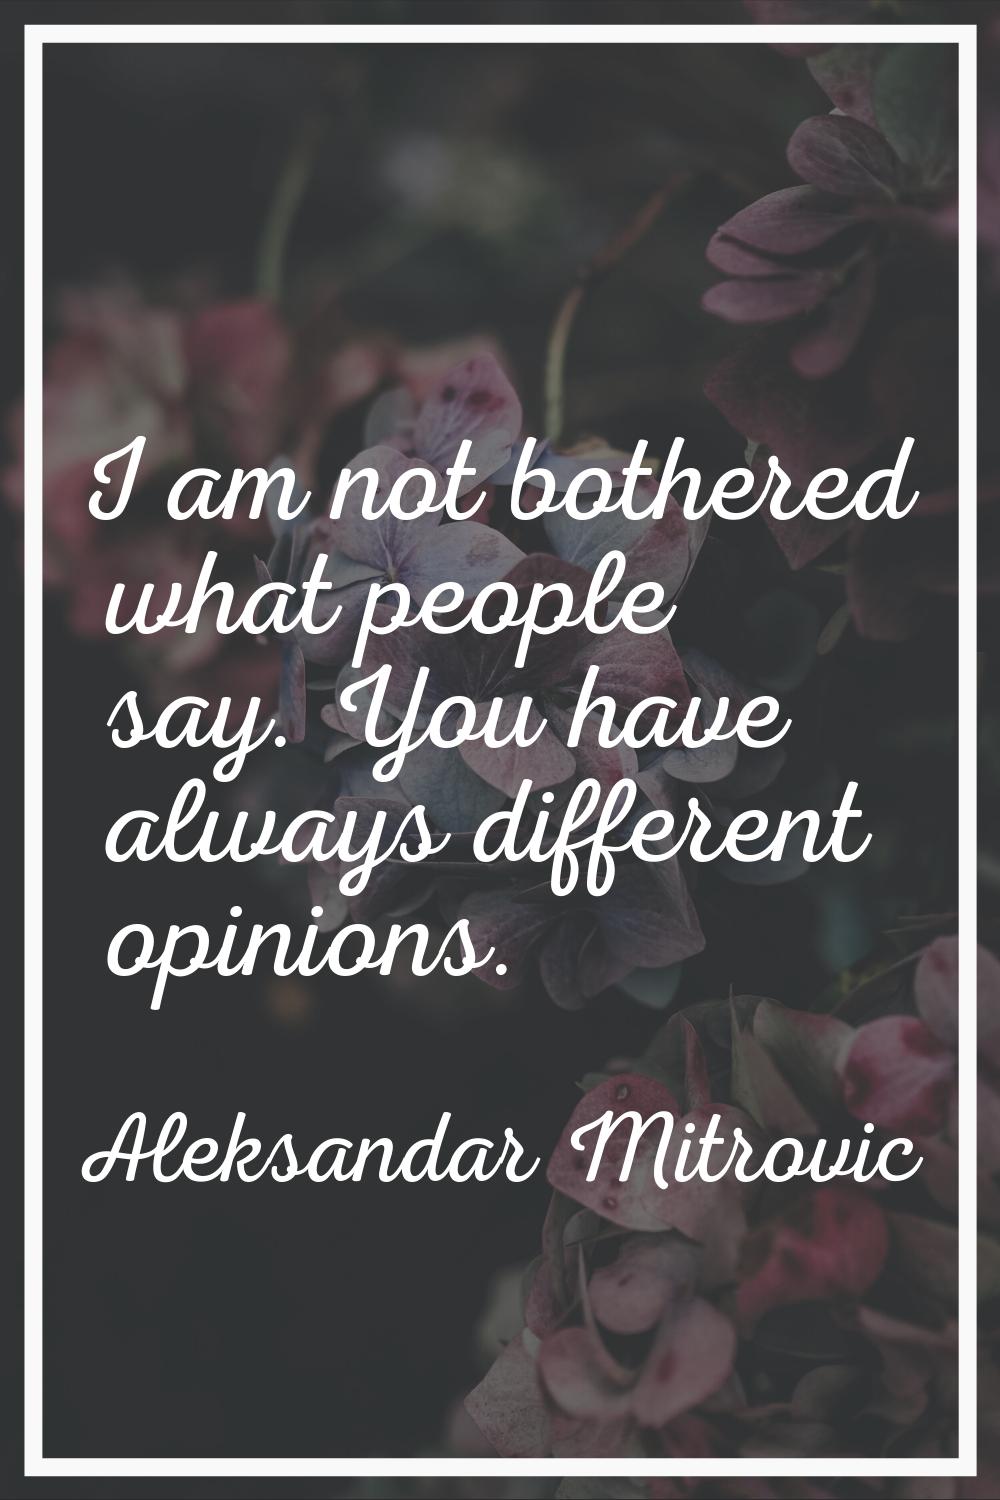 I am not bothered what people say. You have always different opinions.